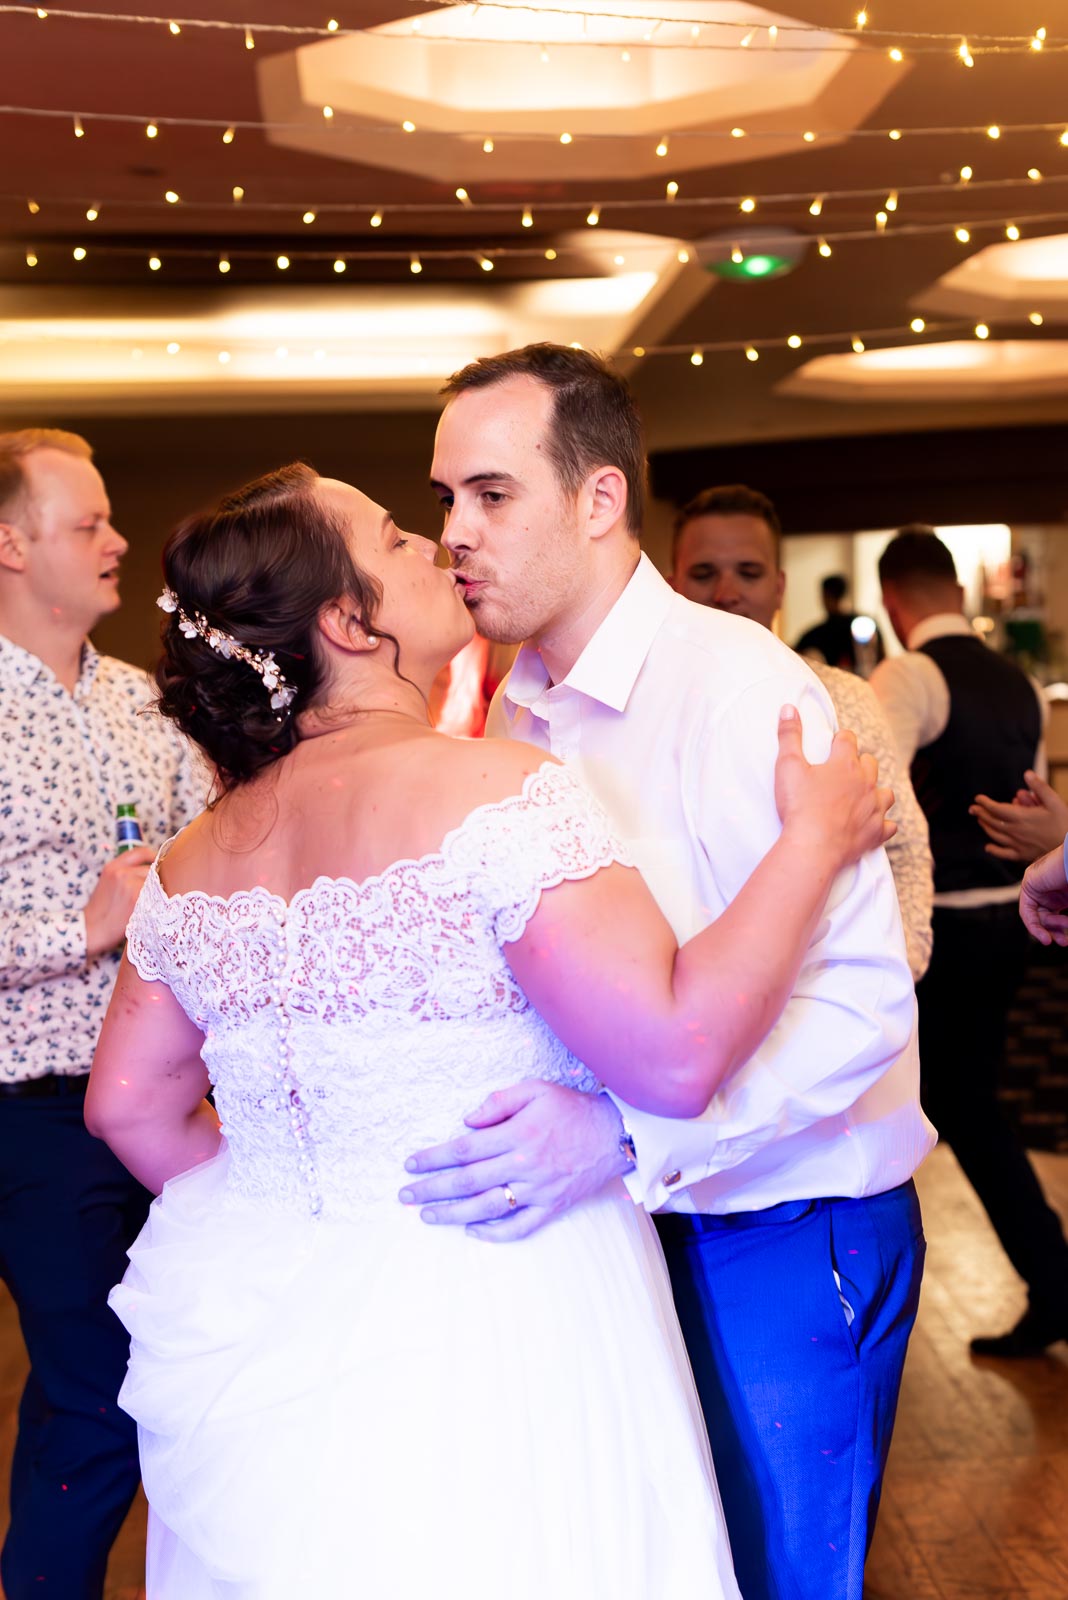 Amy and James embrace during their first dance in the White Hart Hotel, Lewes.